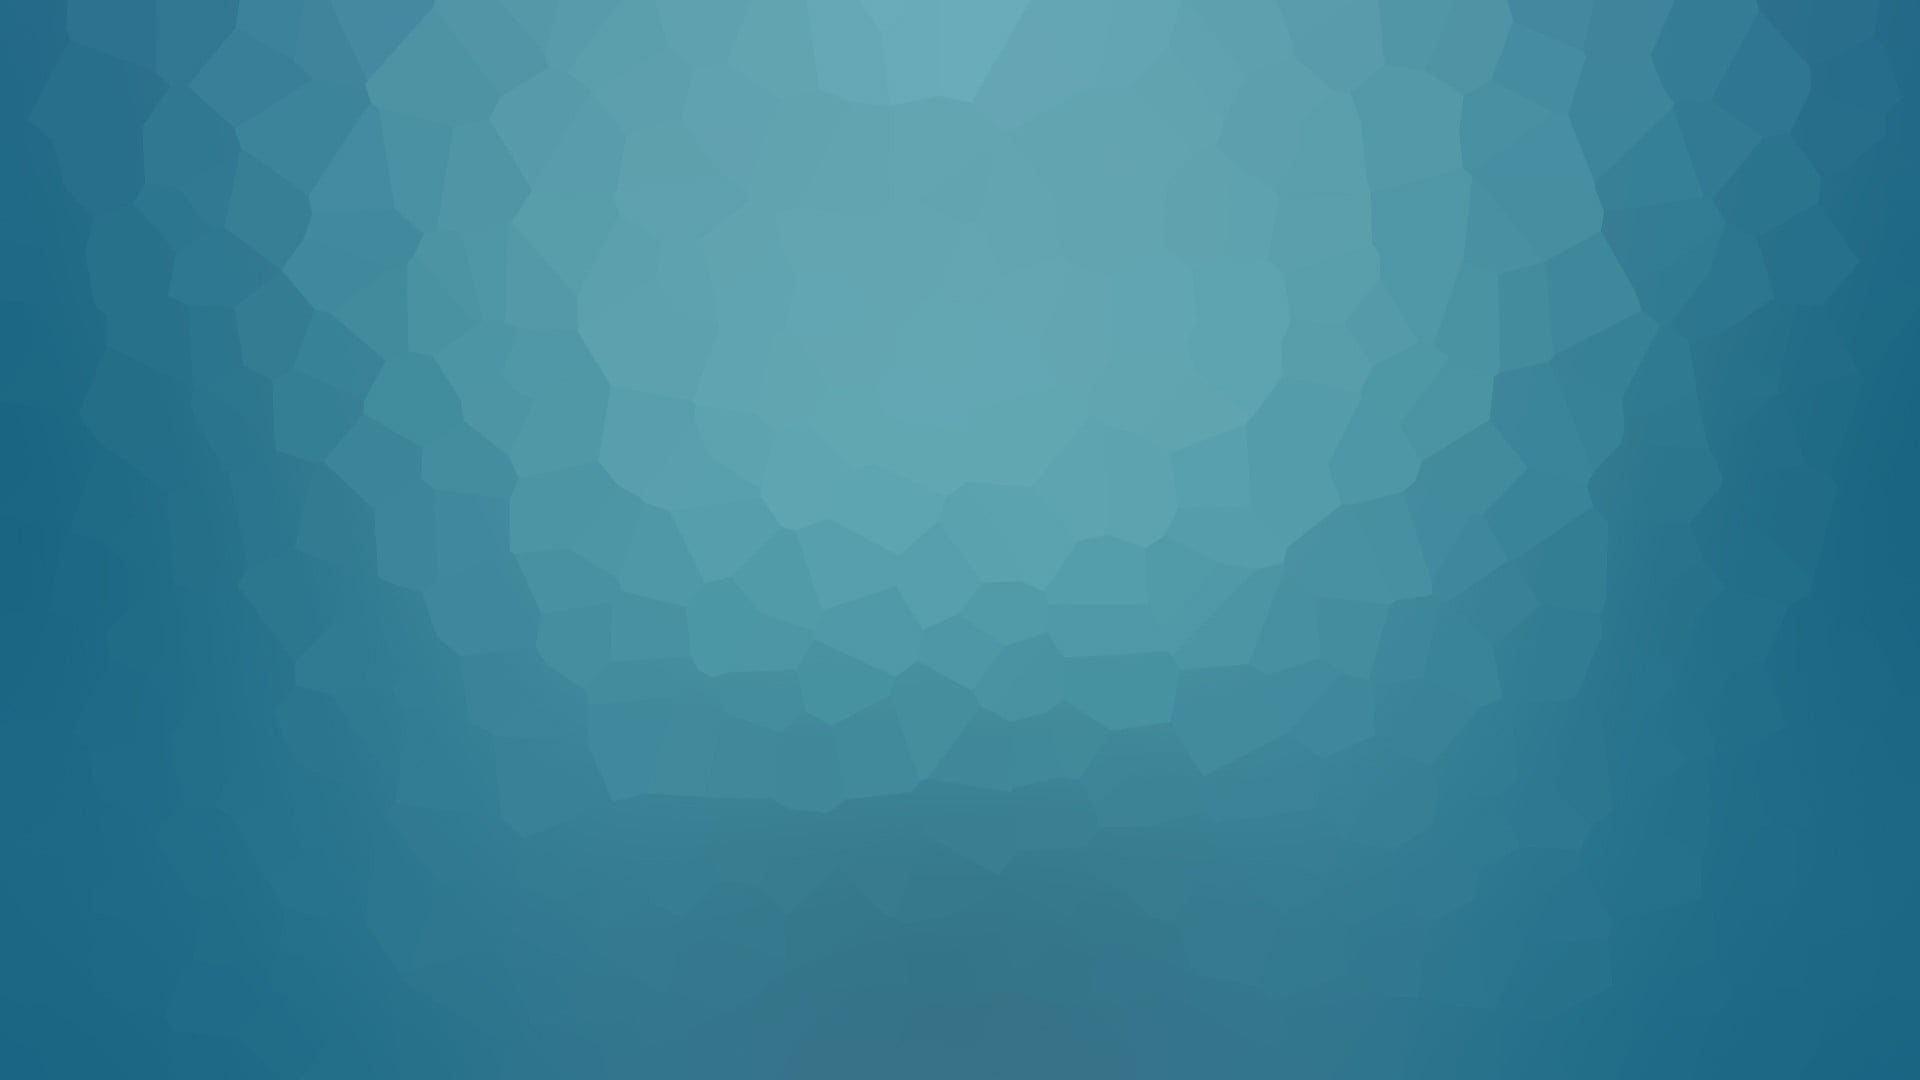 minimalism, blue, low poly, backgrounds, full frame, abstract